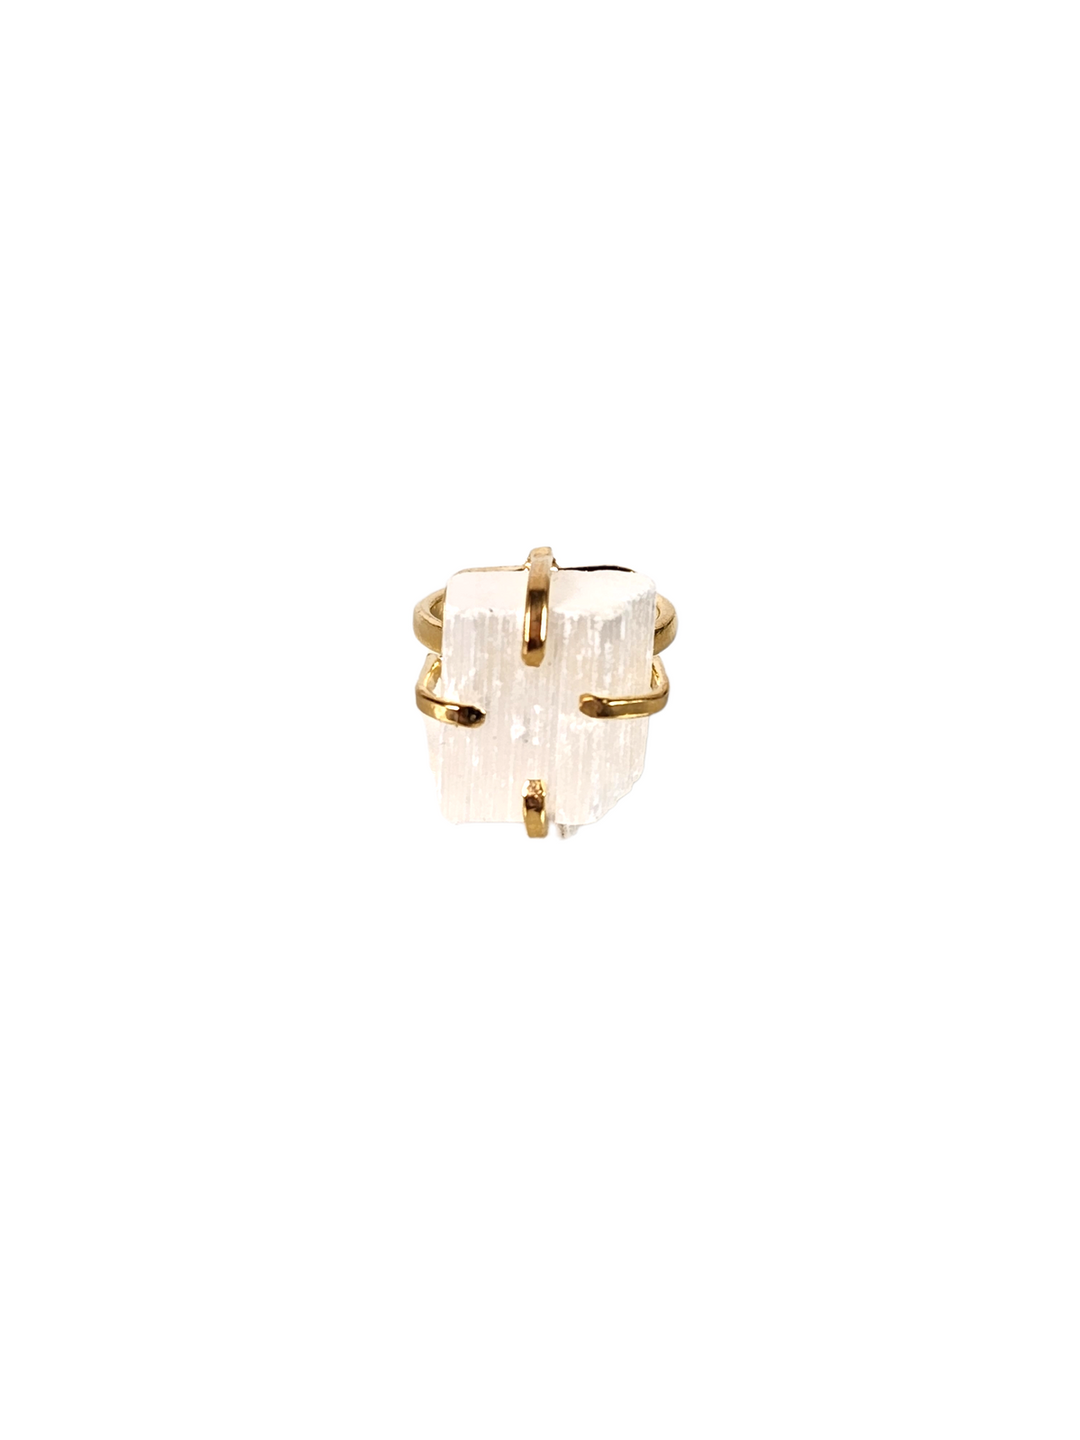 The Maple Dainty Selenite Ring Collection